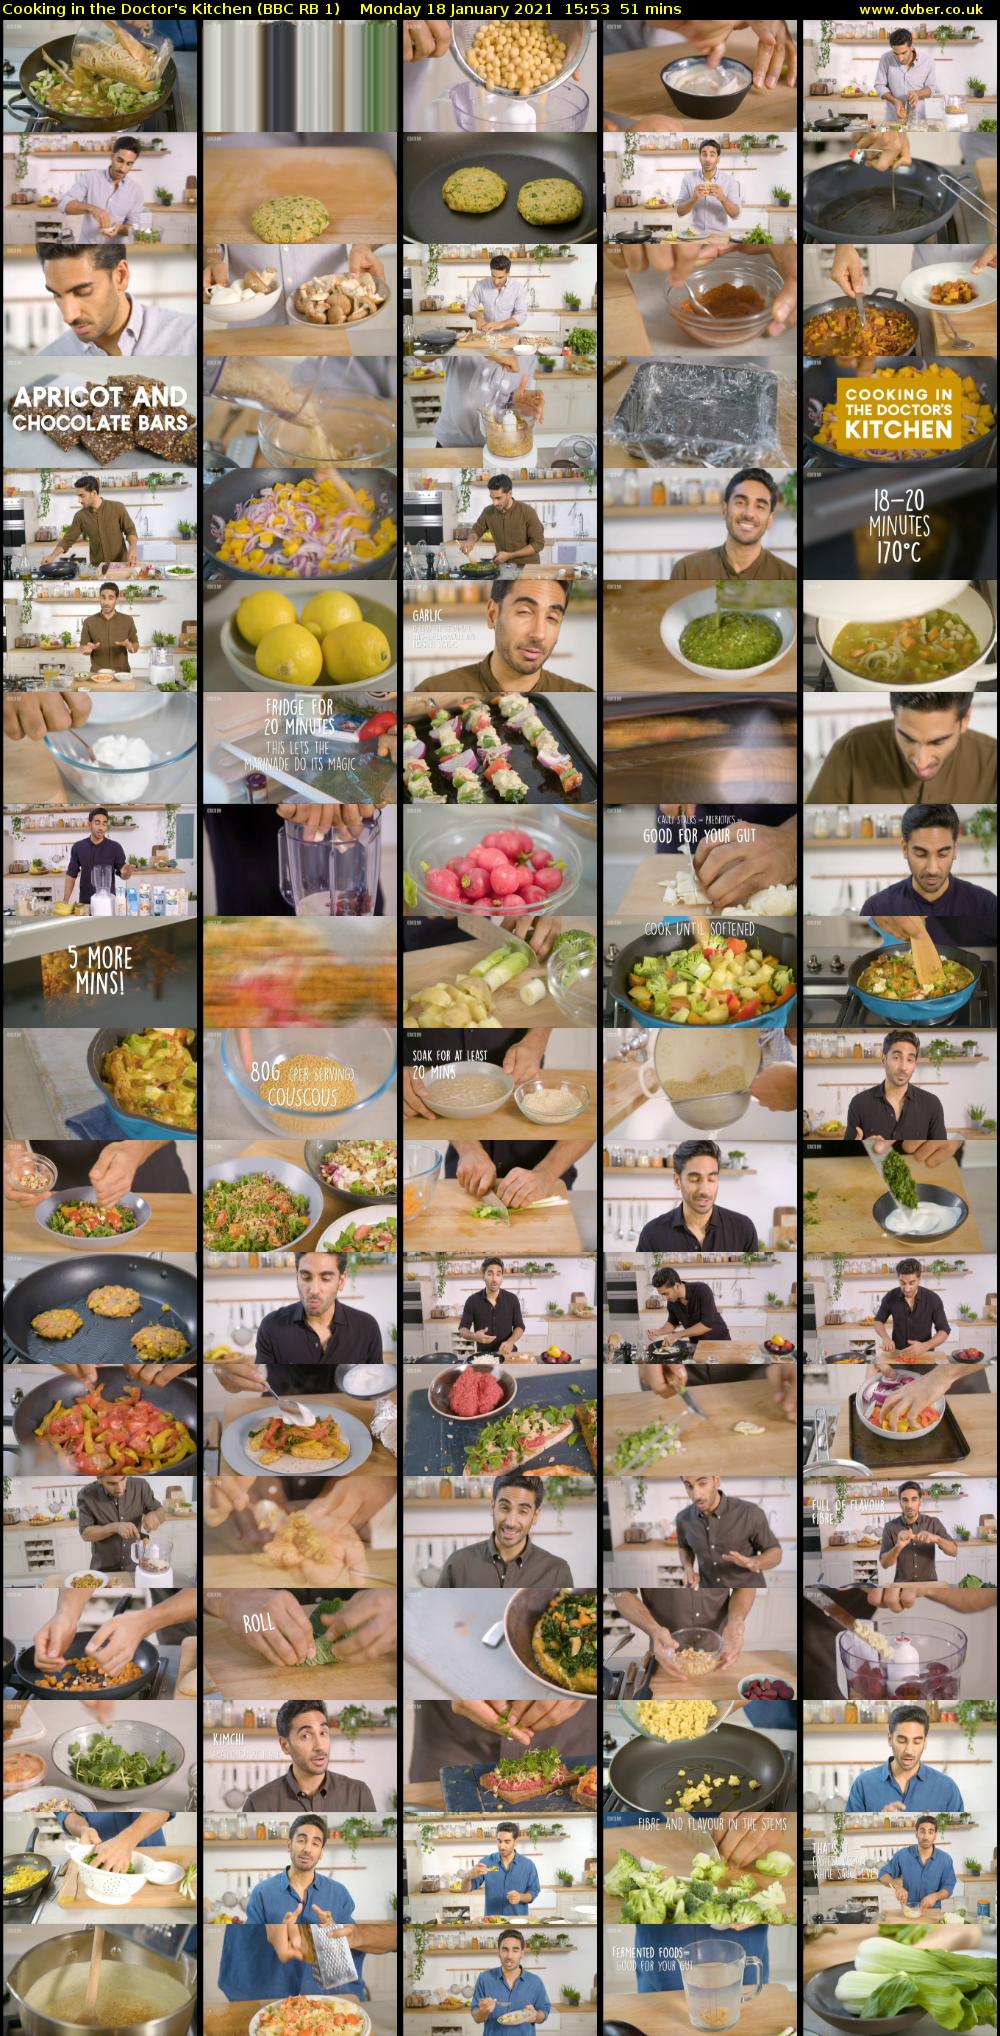 Cooking in the Doctor's Kitchen (BBC RB 1) Monday 18 January 2021 15:53 - 16:44